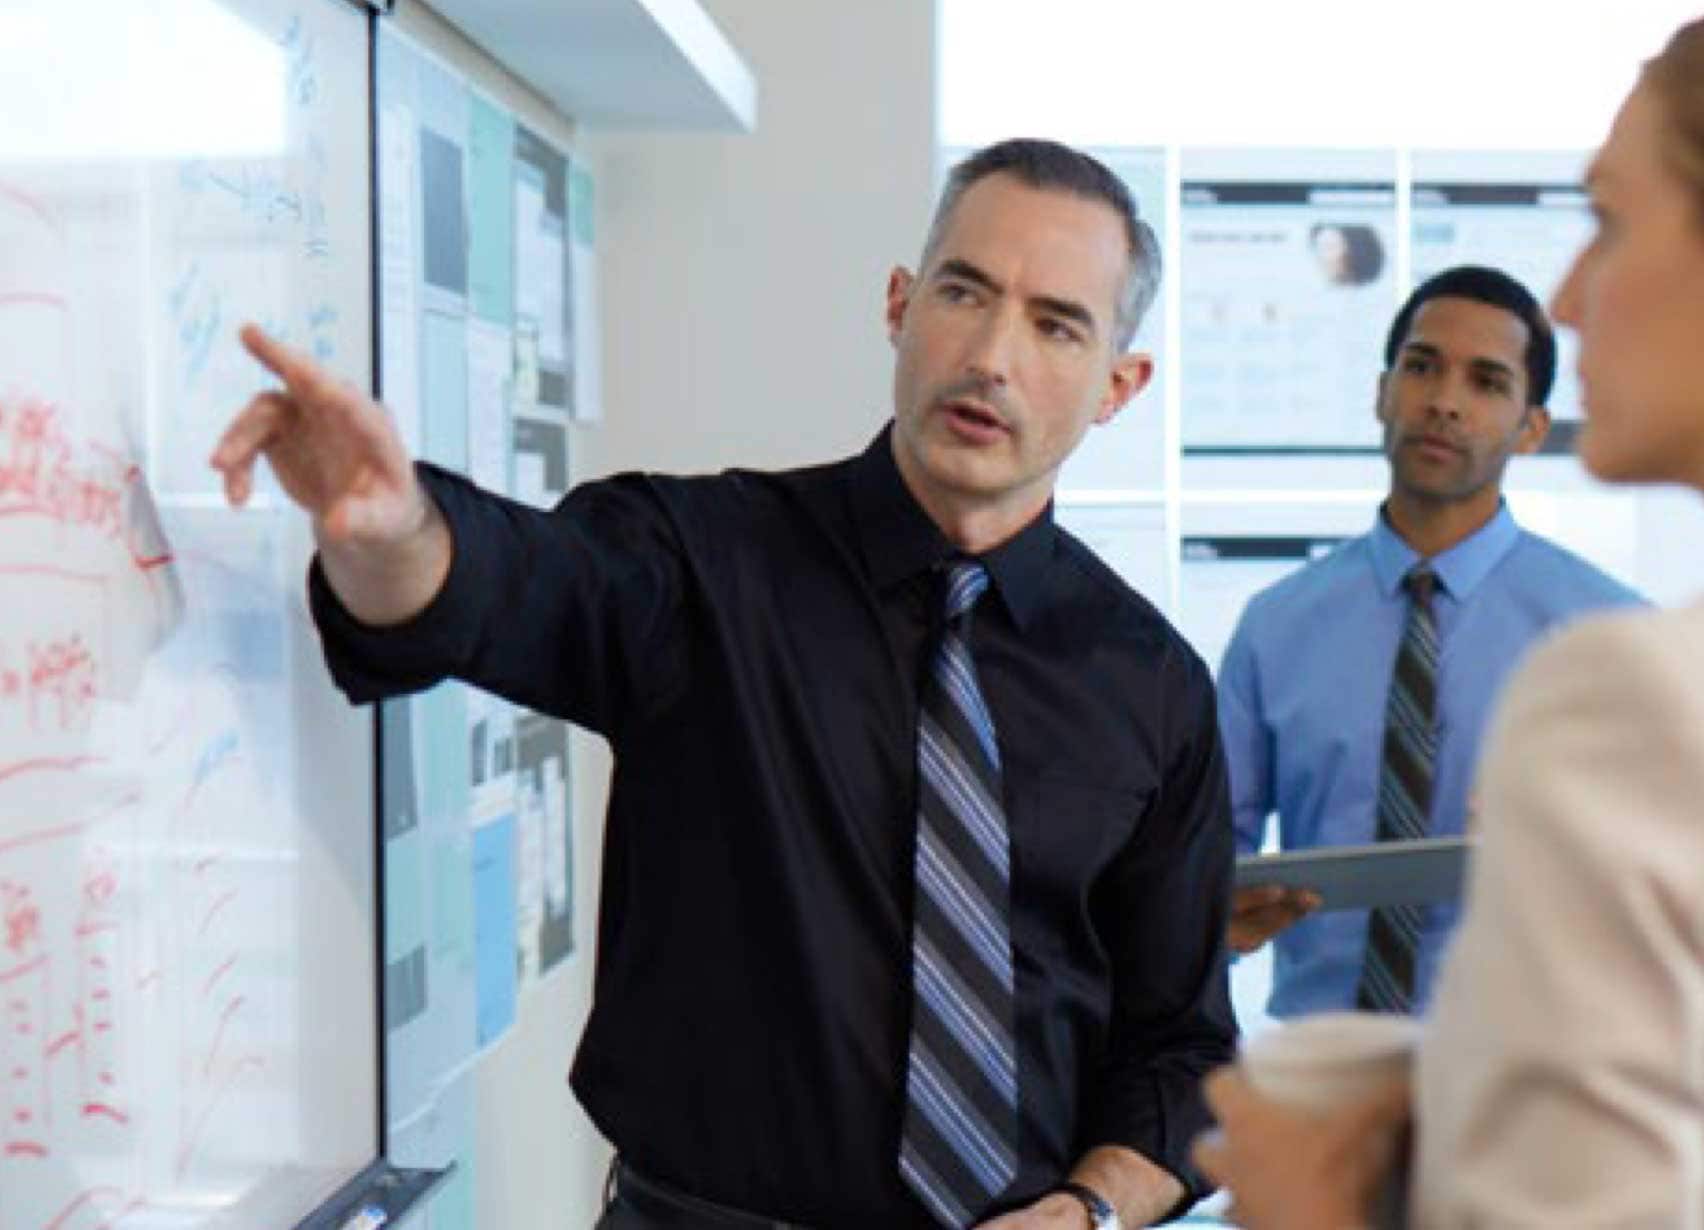 Man pointing at whiteboard talking with co-workers